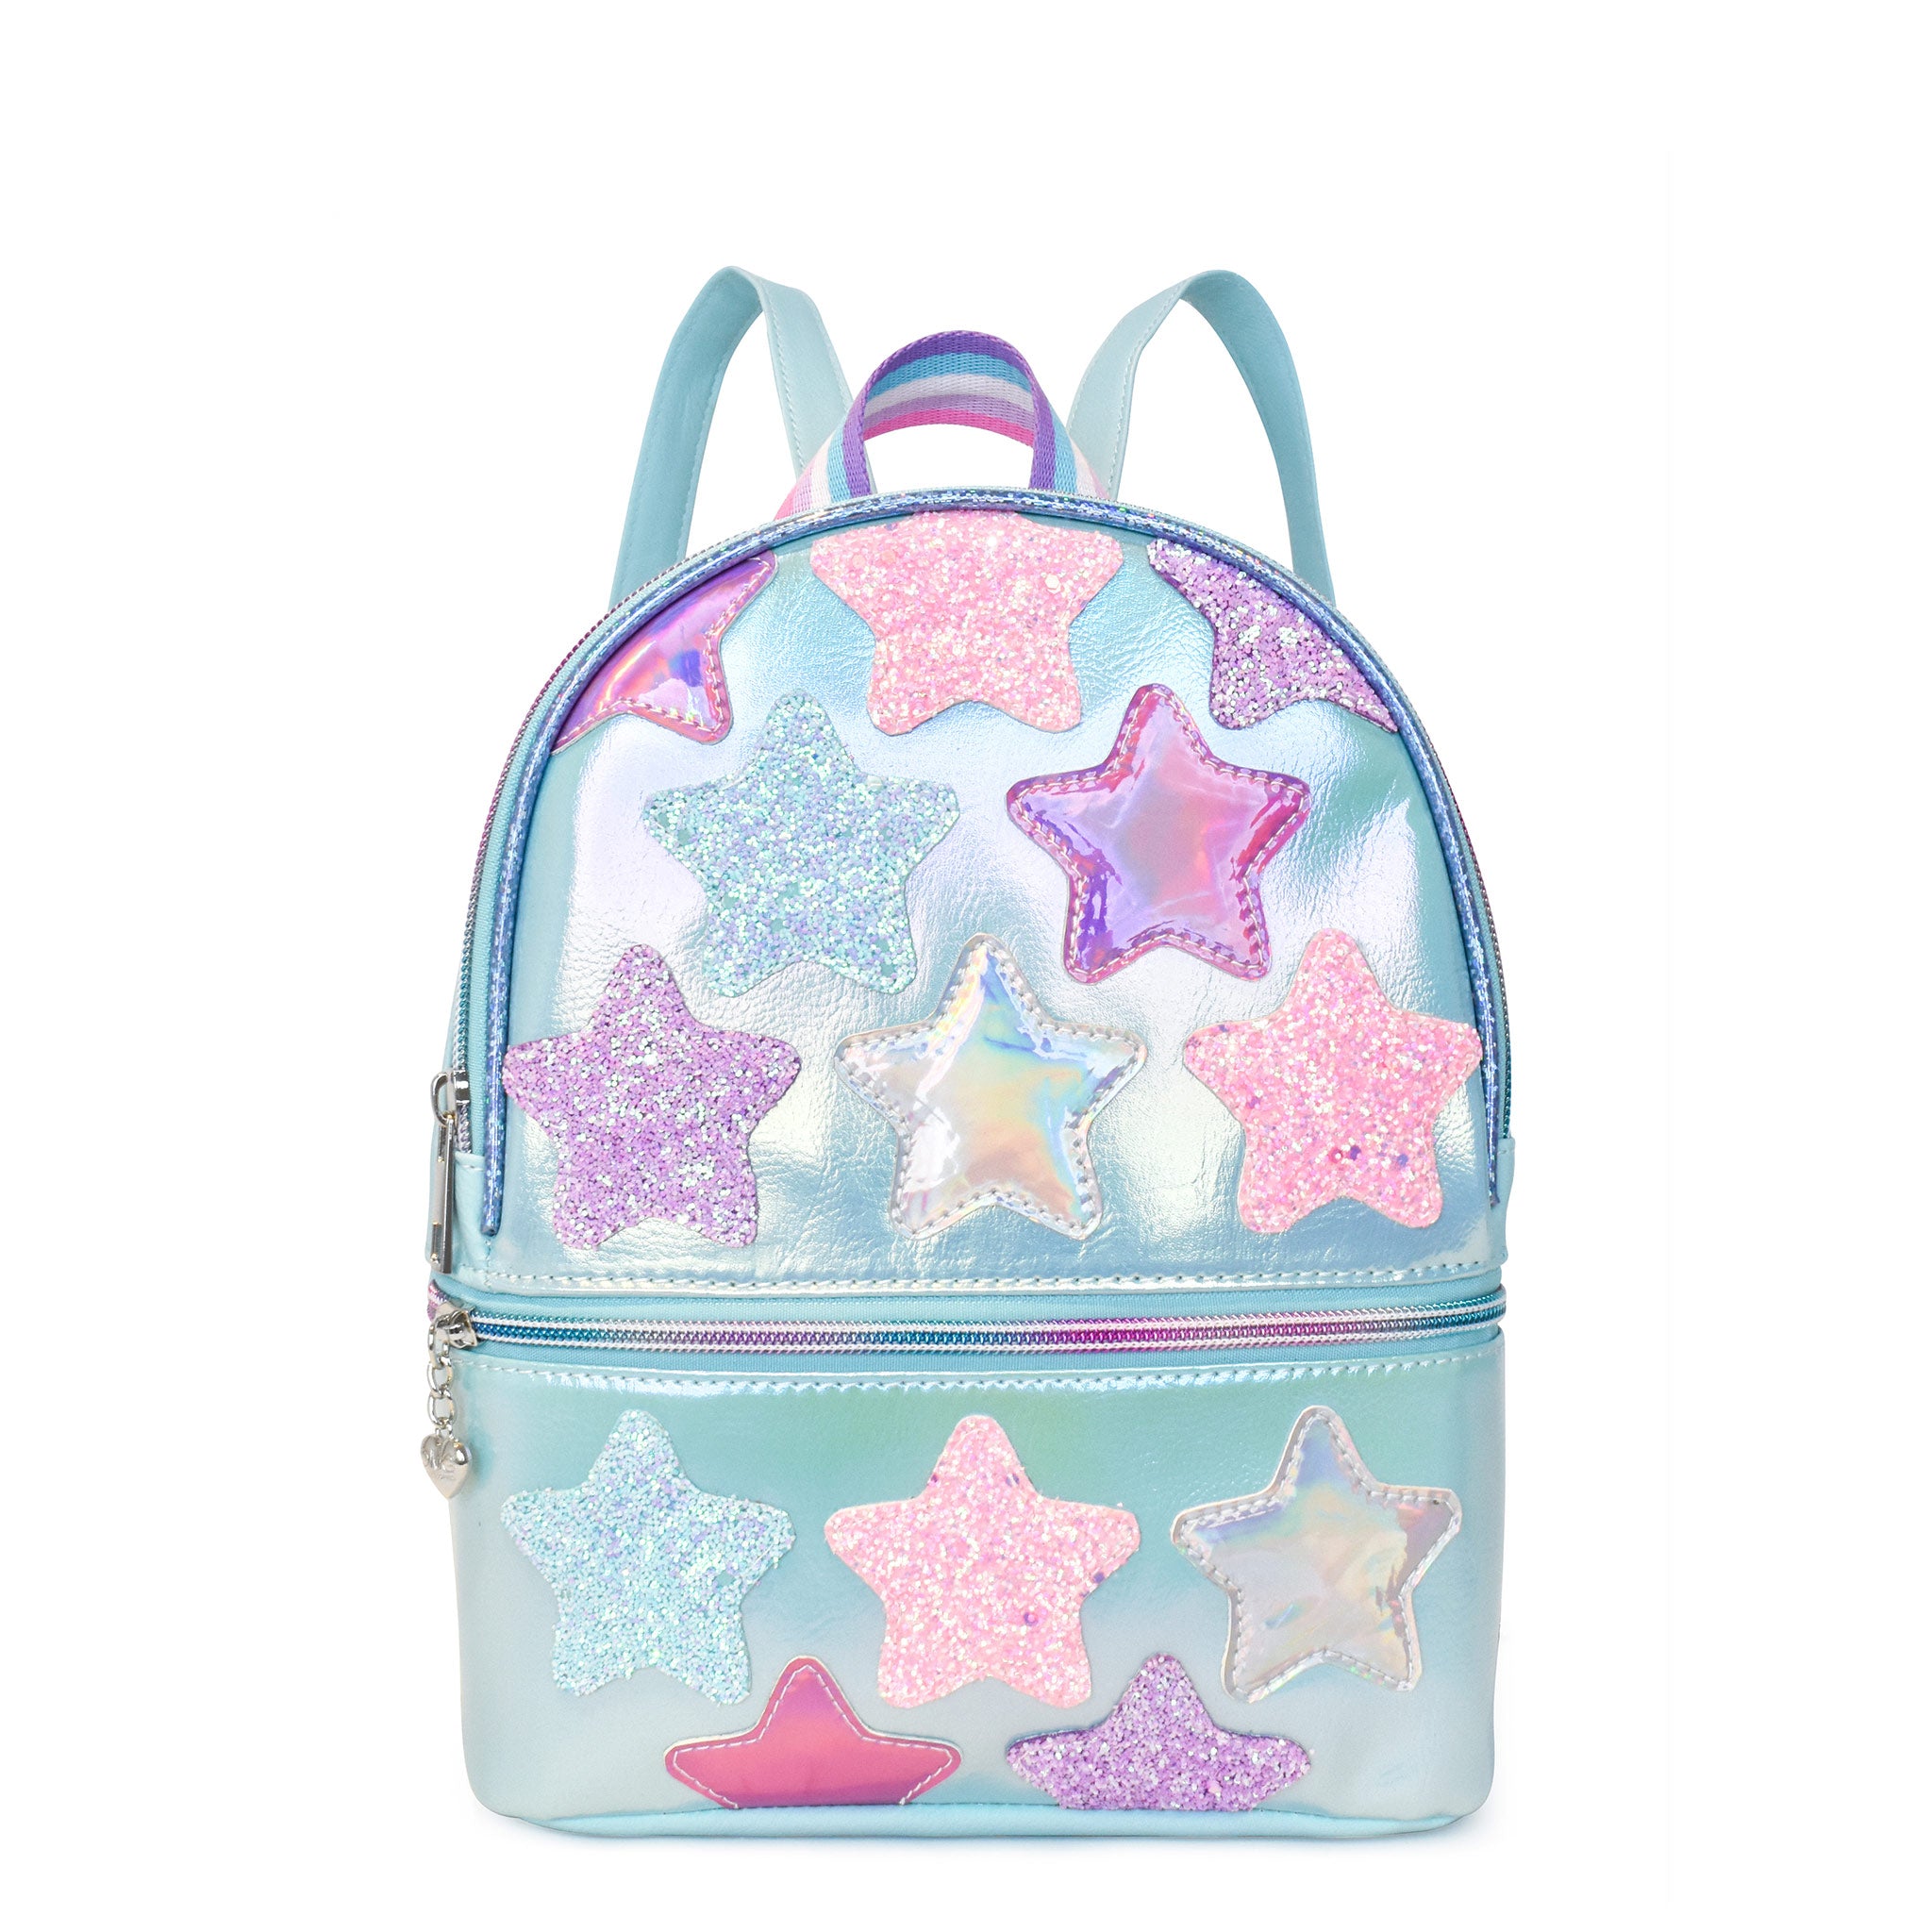 Front view of a blue metallic mini backpack with glitter and metallic star patches 